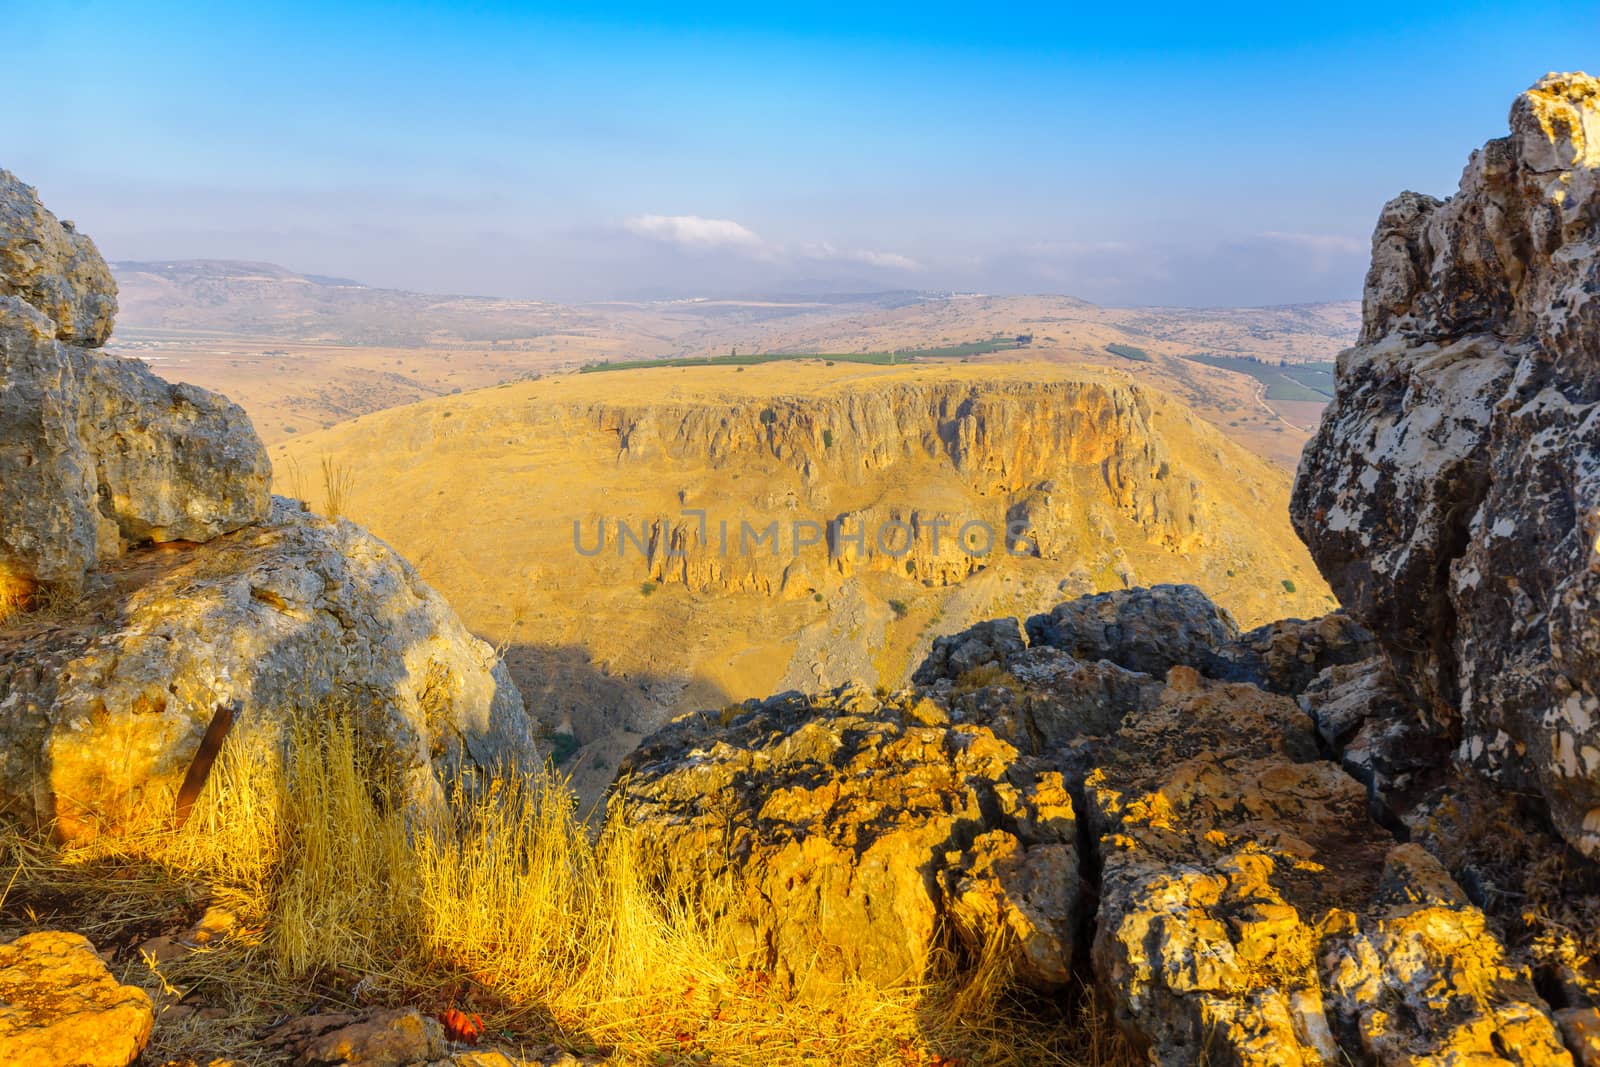 View landscape and Mount Nitay from Mount Arbel National Park. Northern Israel